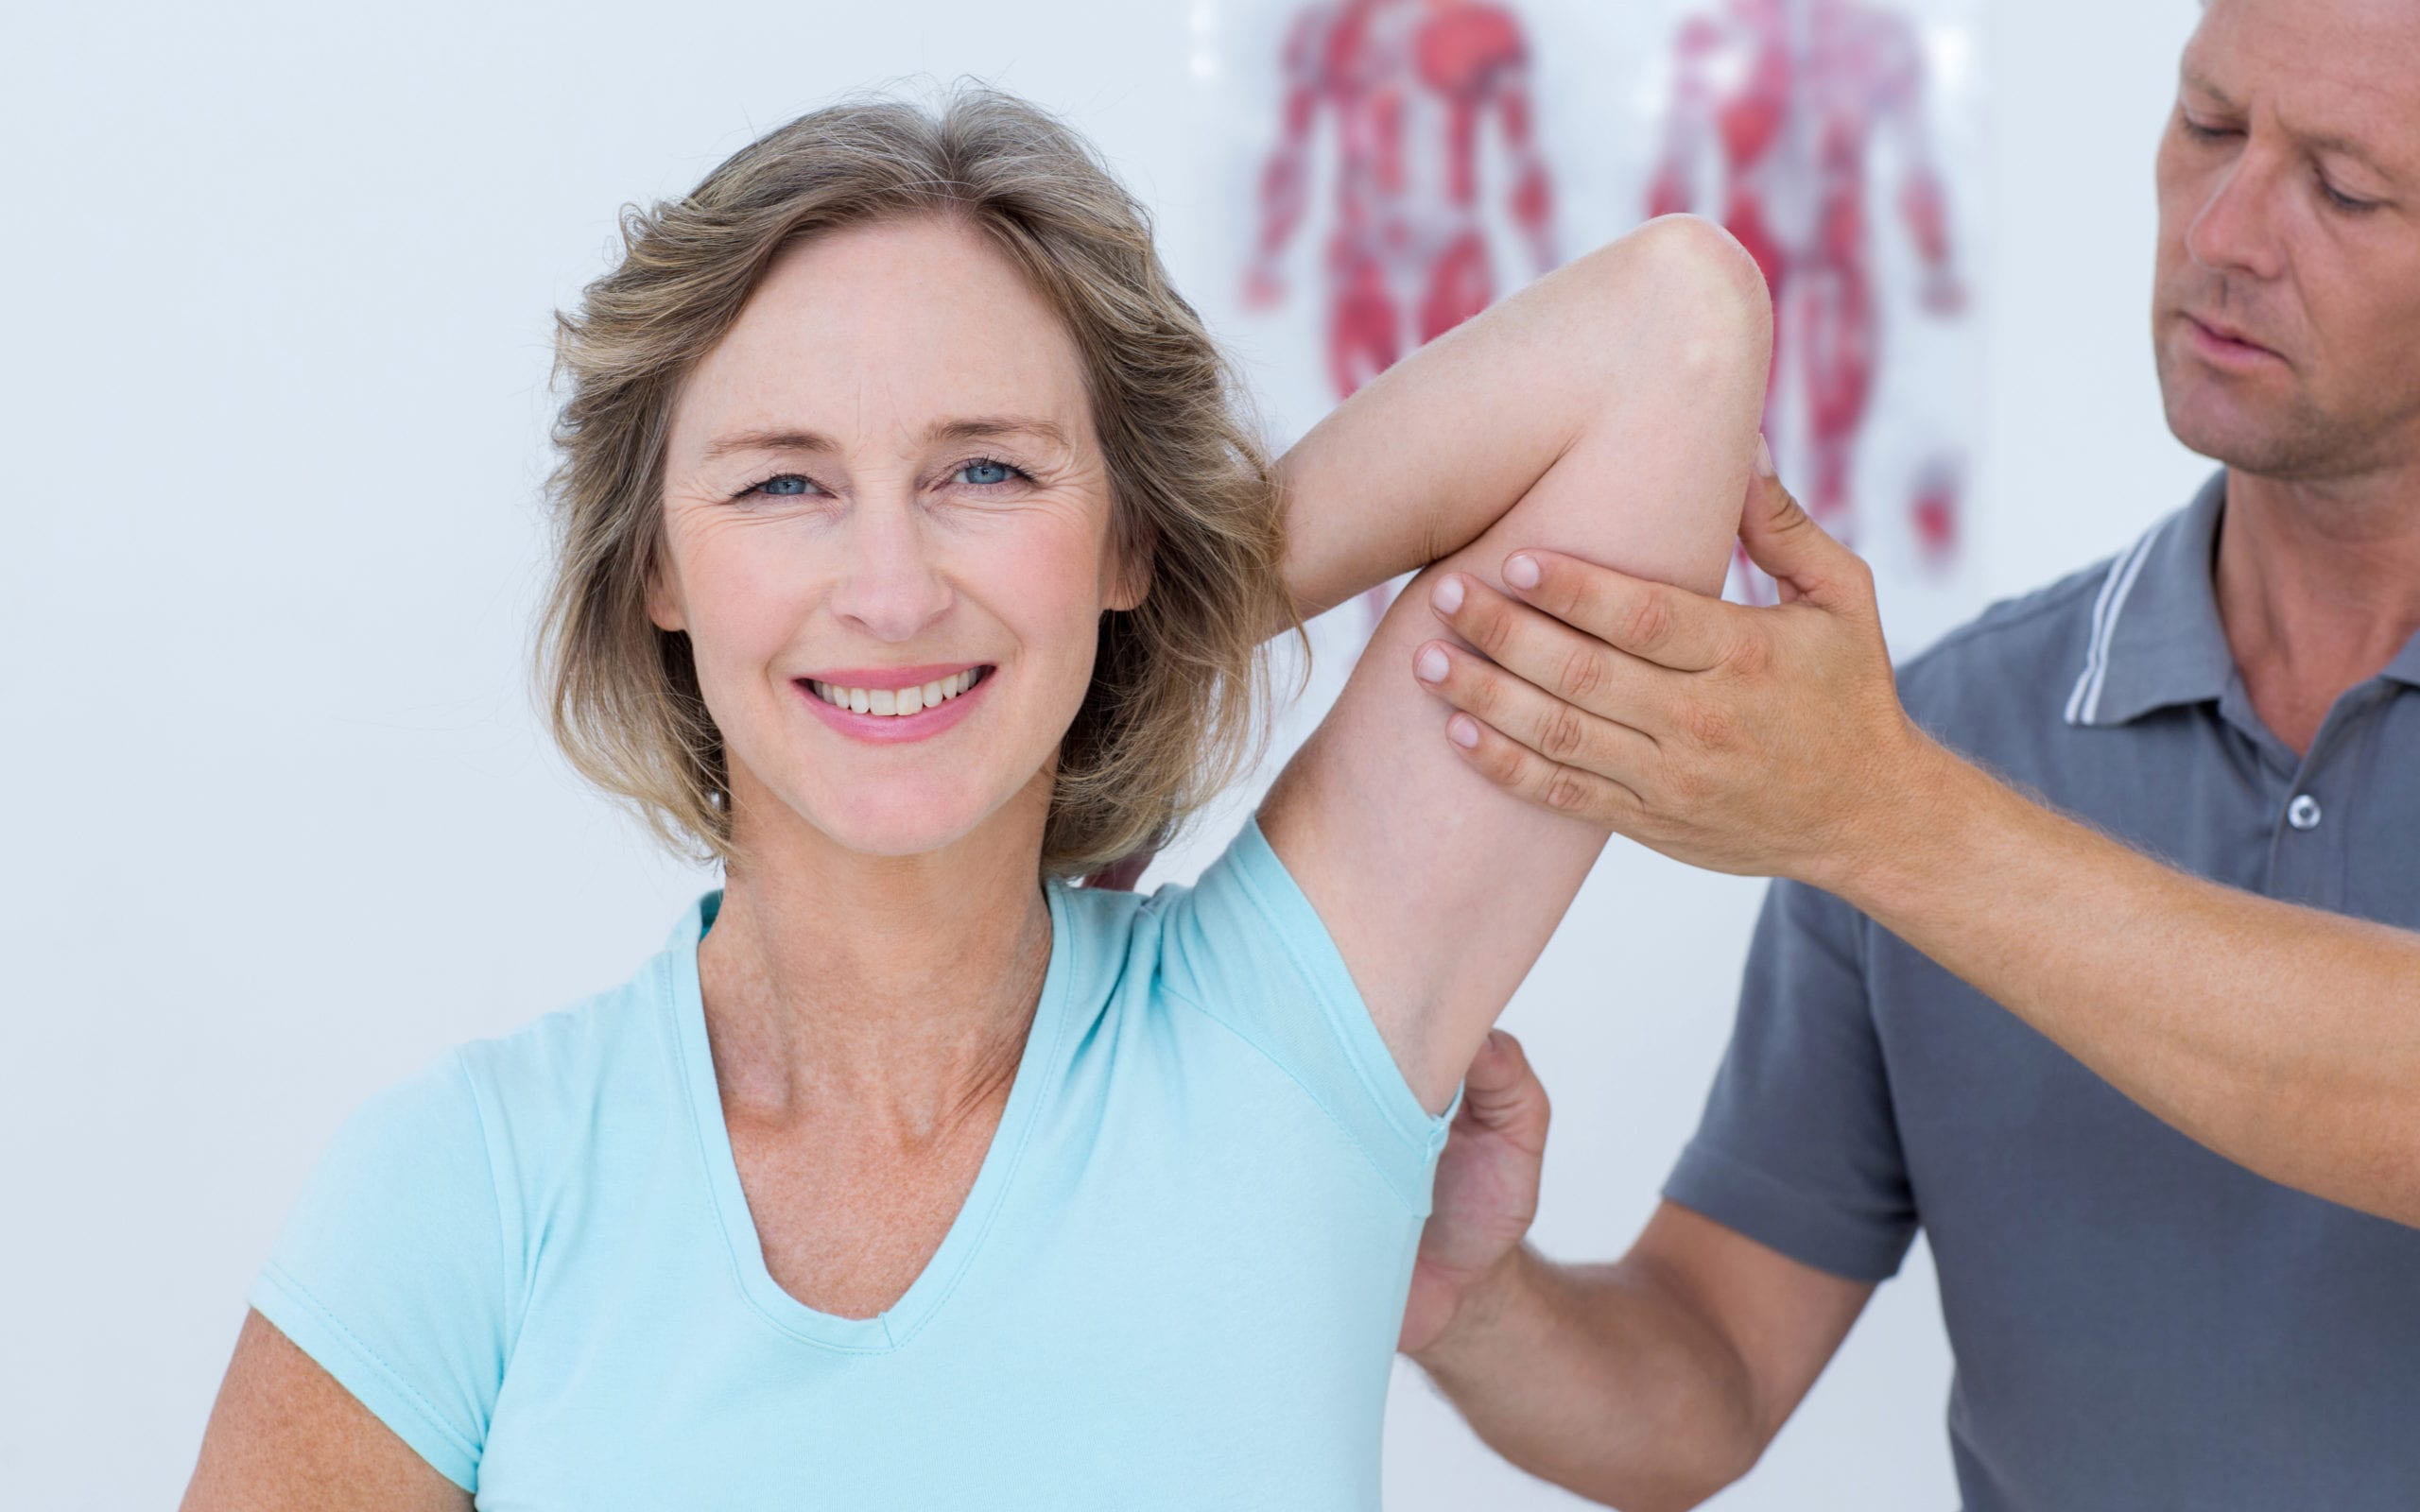 physical therapy services 